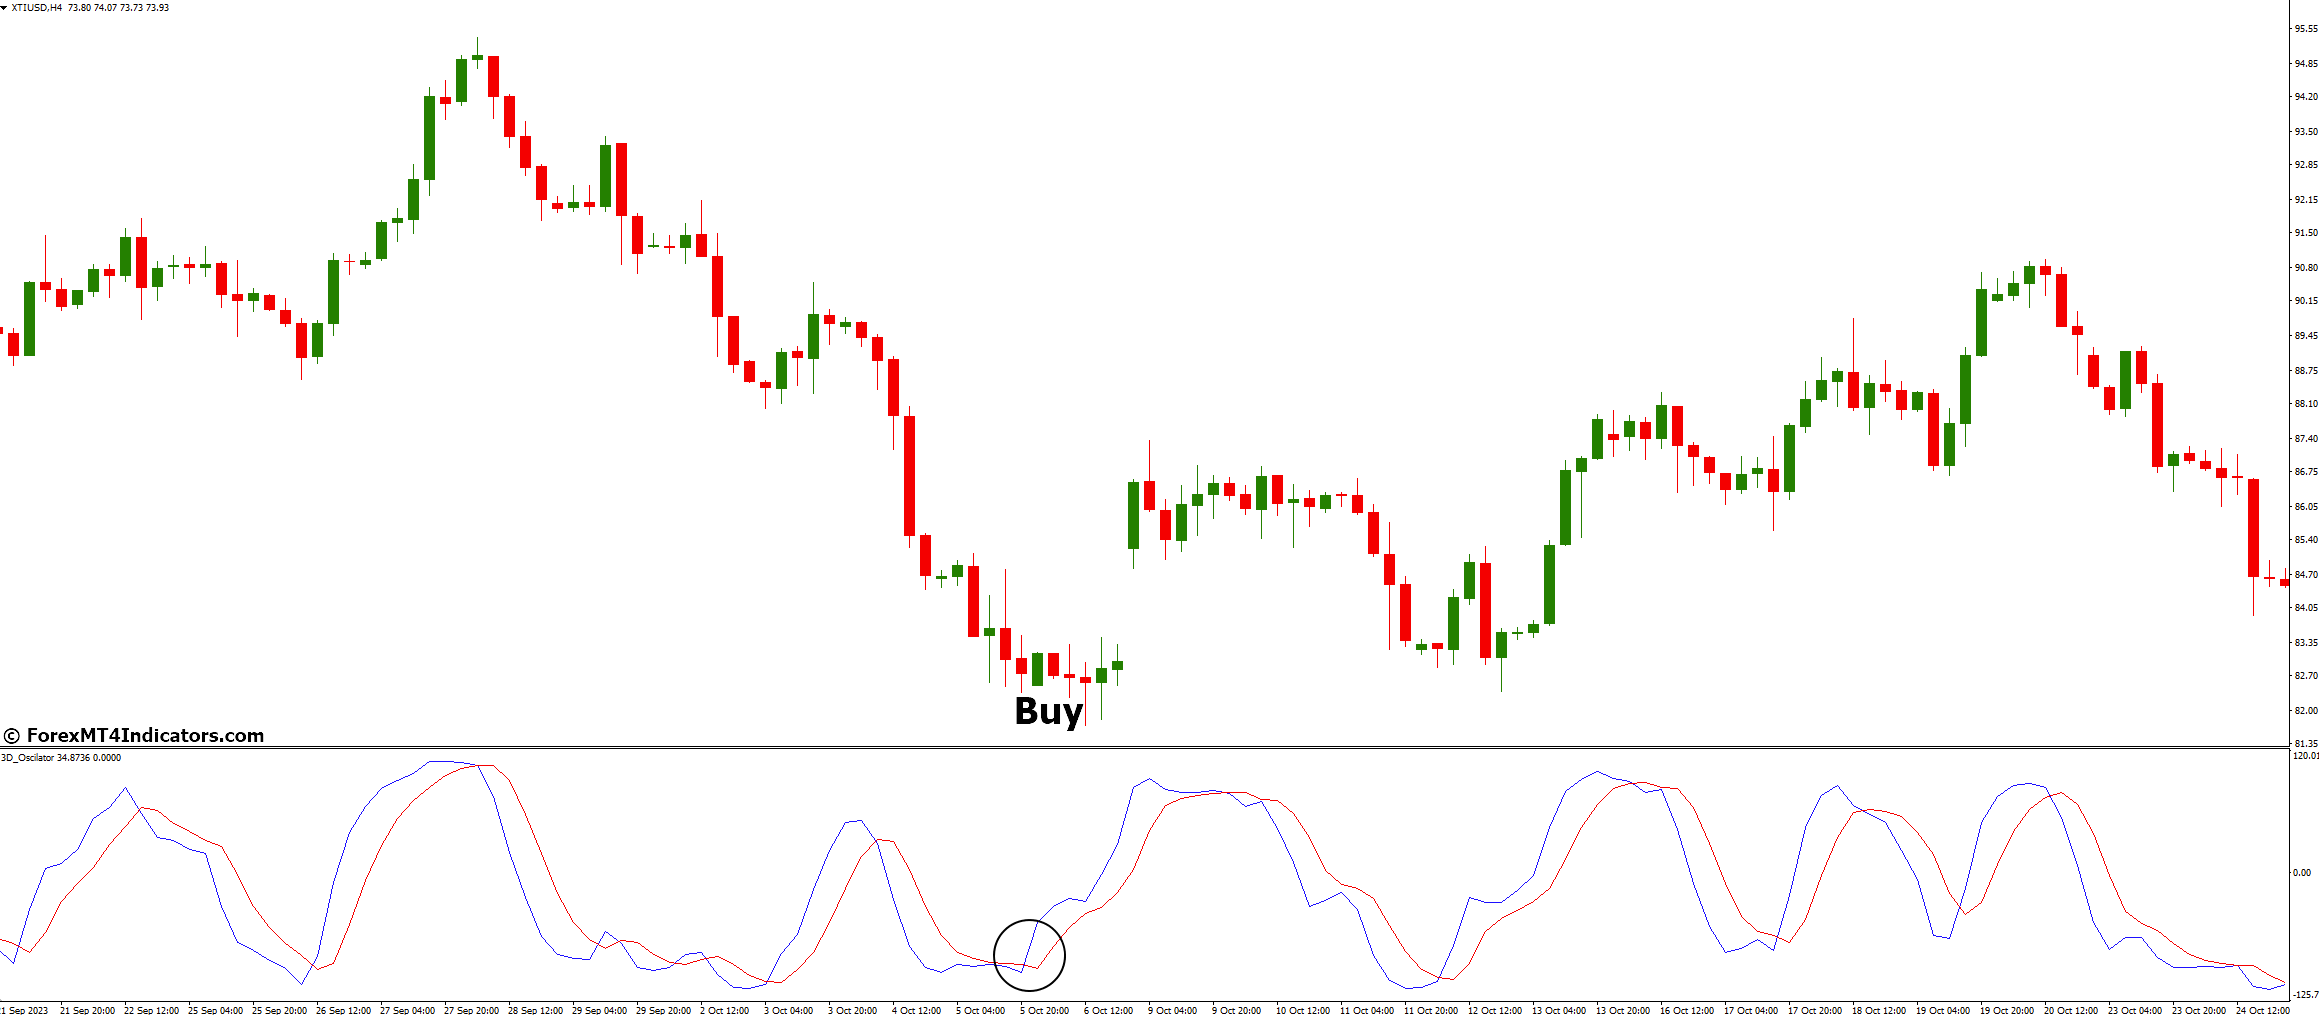 How to Trade with 3D Oscilator Indicator - Buy Entry